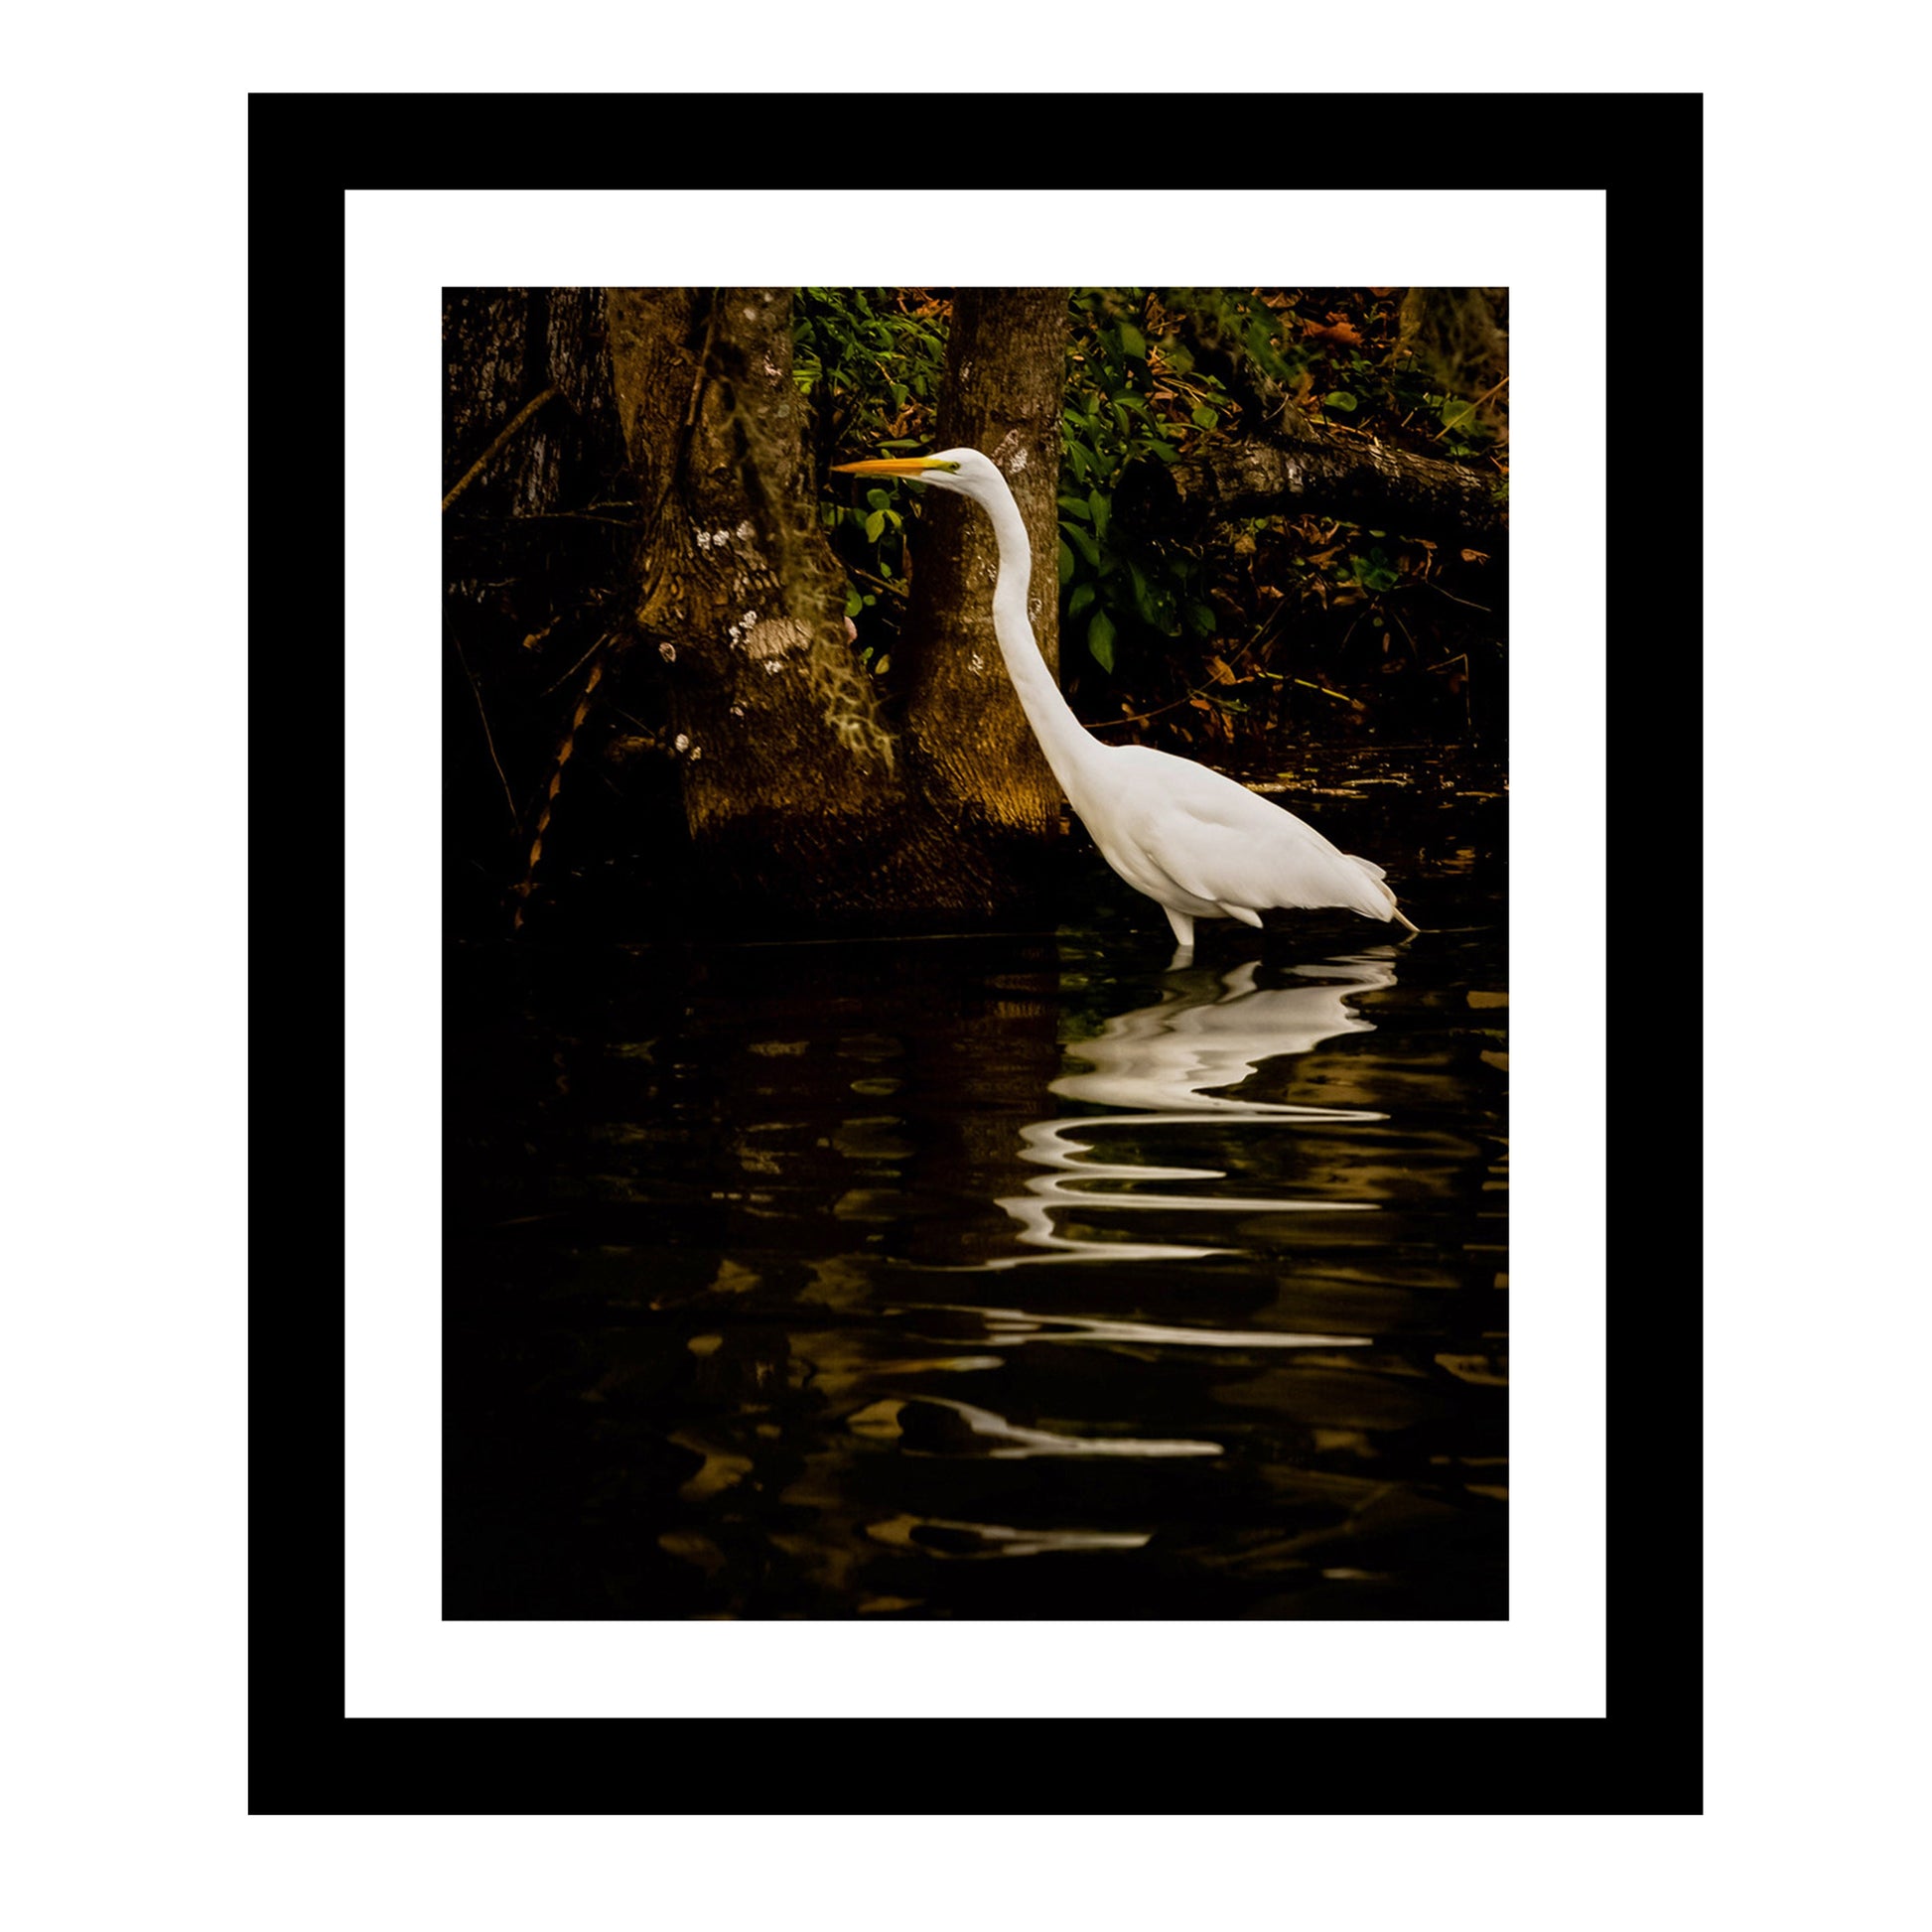 Snowy White Egret on the Dora Canal. Reflections in the Water.